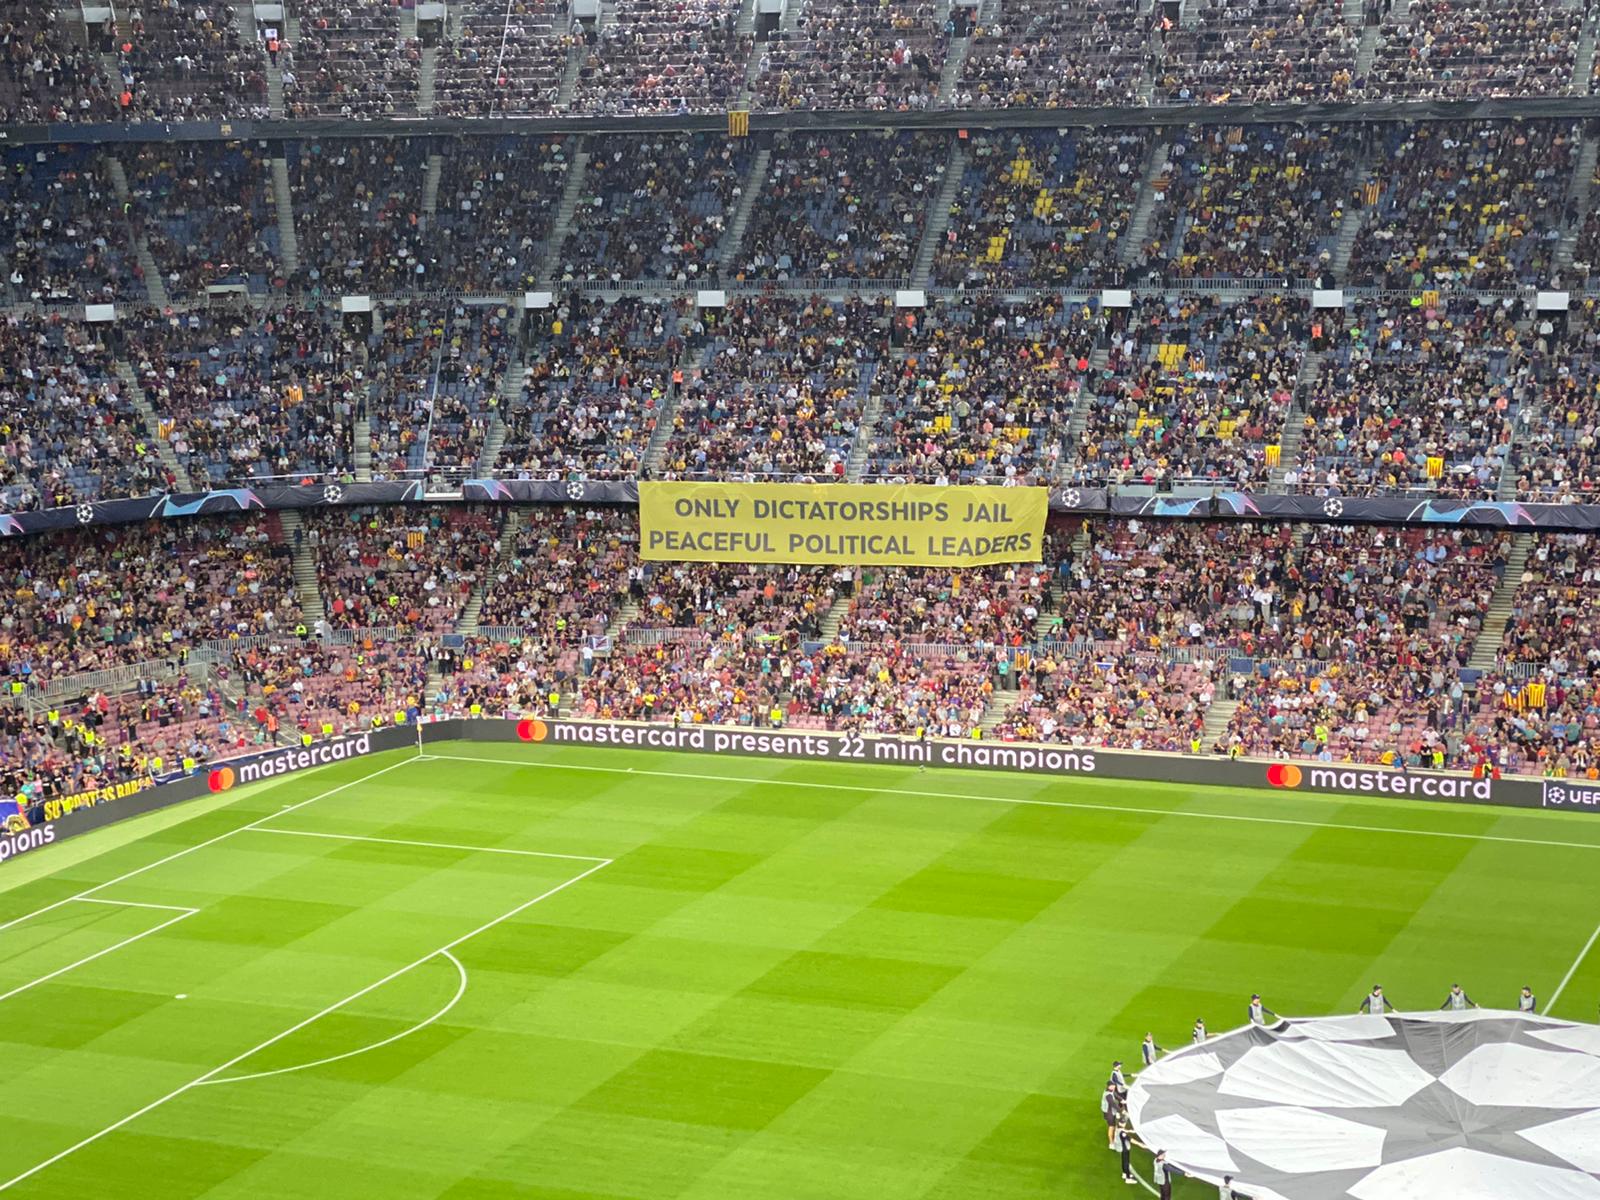 Camp Nou's message to Europe: "Only dictatorships jail peaceful political leaders"